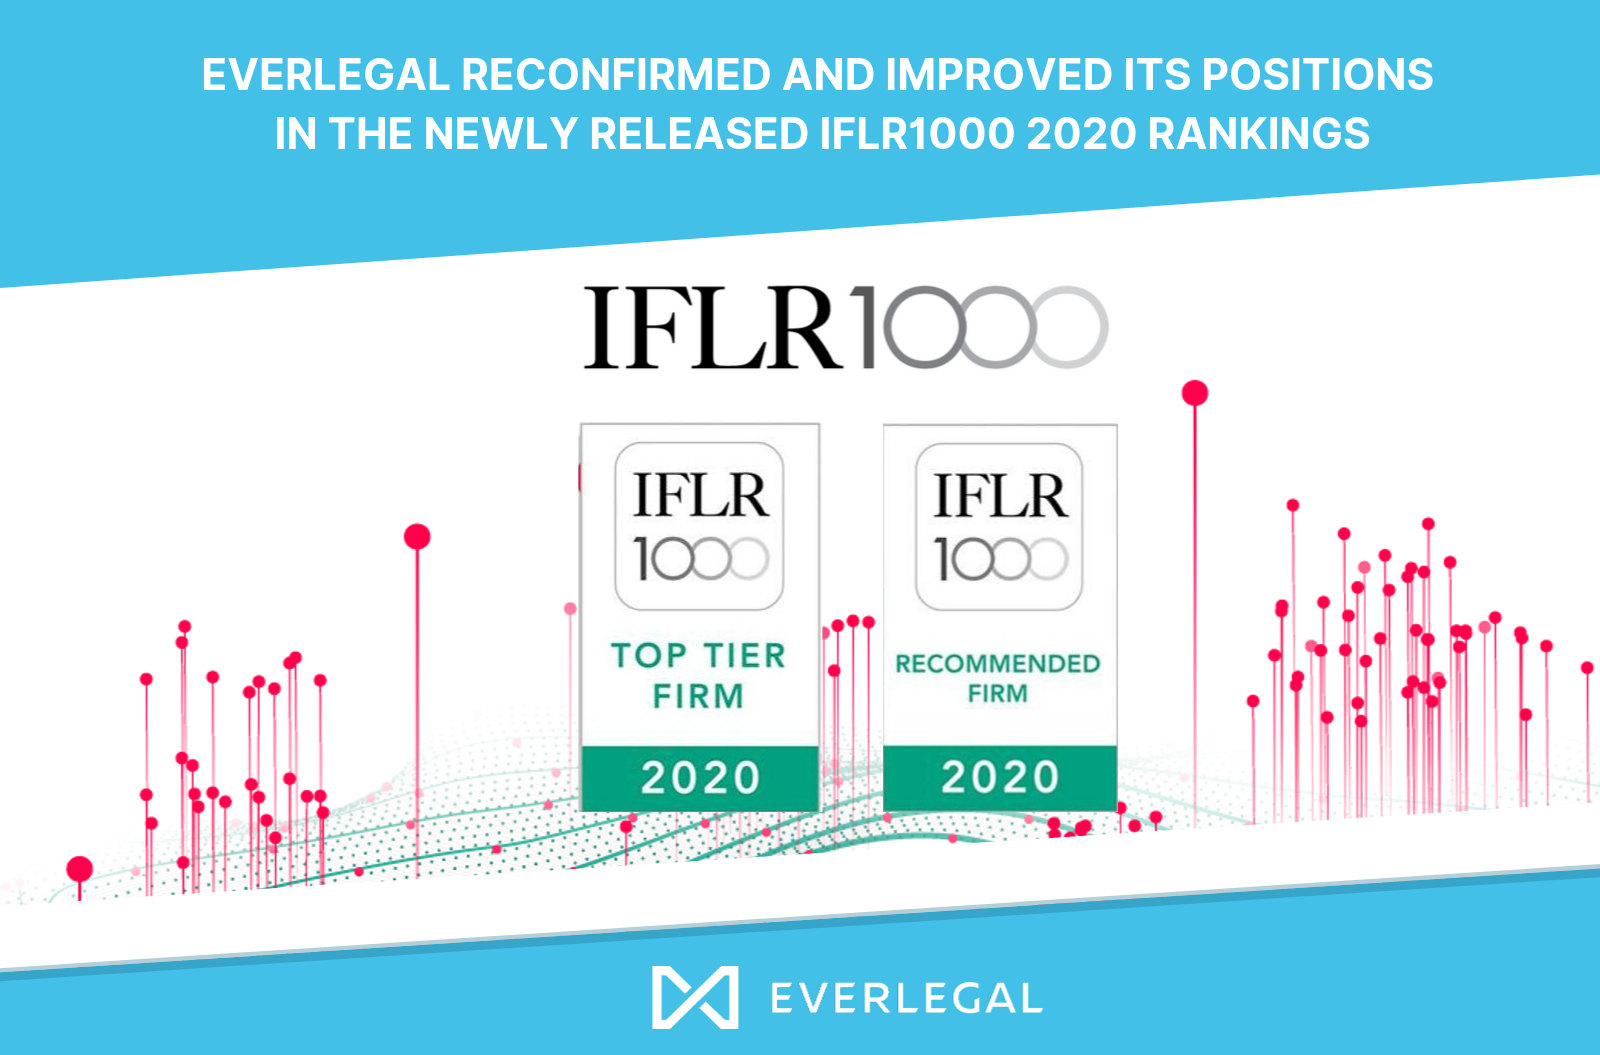 EVERLEGAL reconfirmed and improved its positions in the newly released IFLR1000 2020 rankings